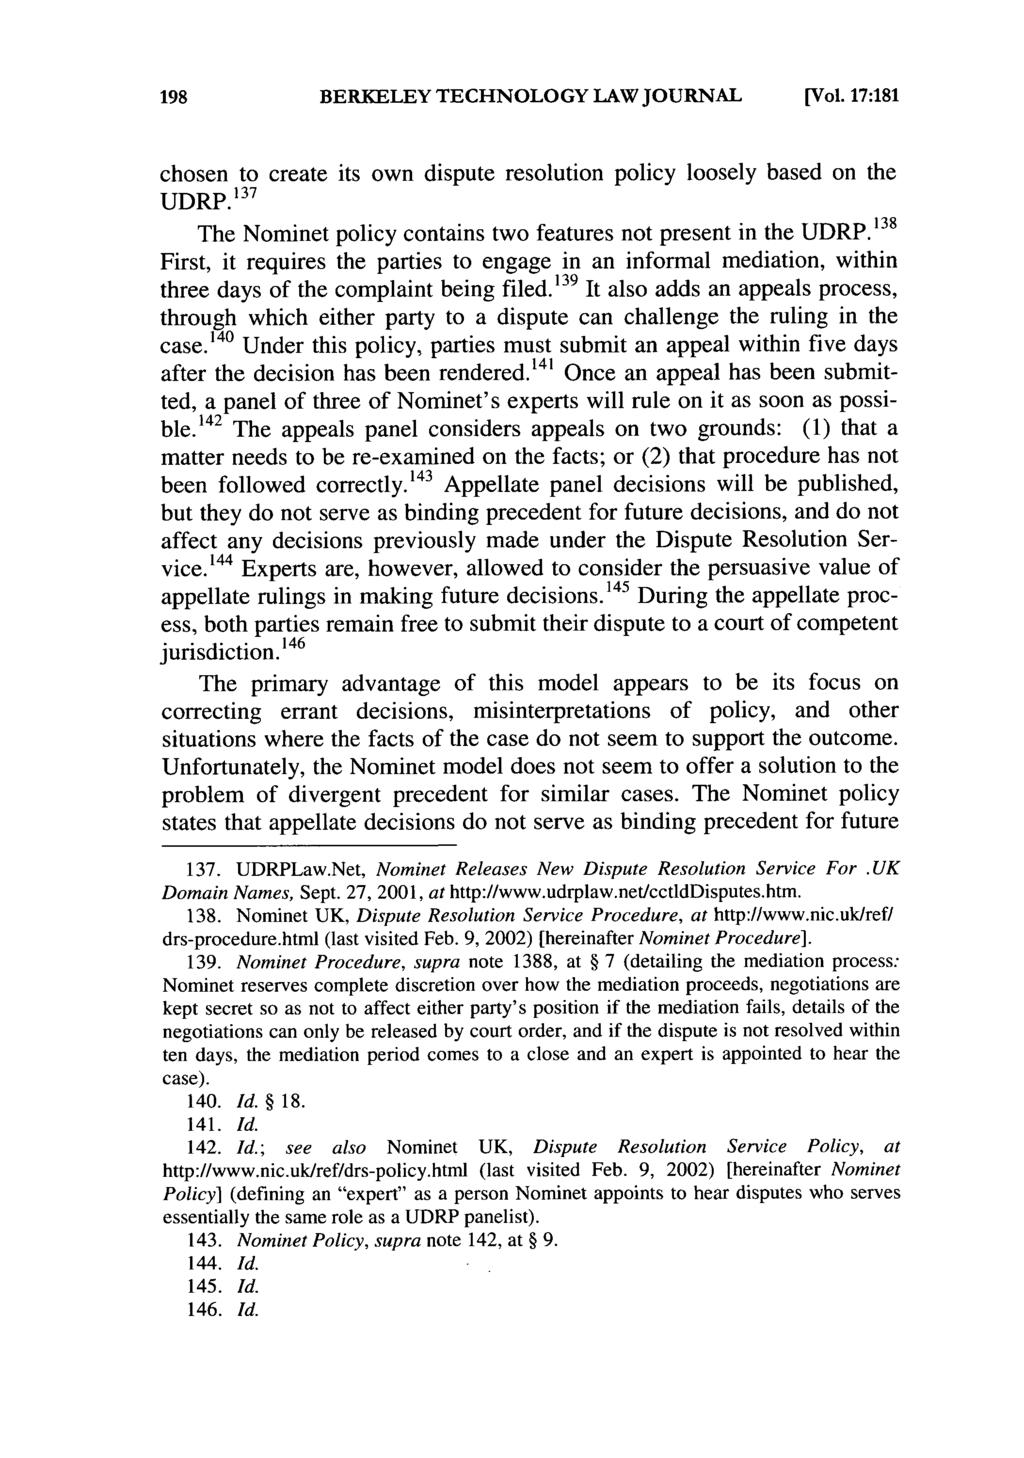 BERKELEY TECHNOLOGY LAW JOURNAL [Vol. 17:181 chosen to create its own dispute resolution policy loosely based on the UDRP.' 37 The Nominet policy contains two features not present in the UDRP.